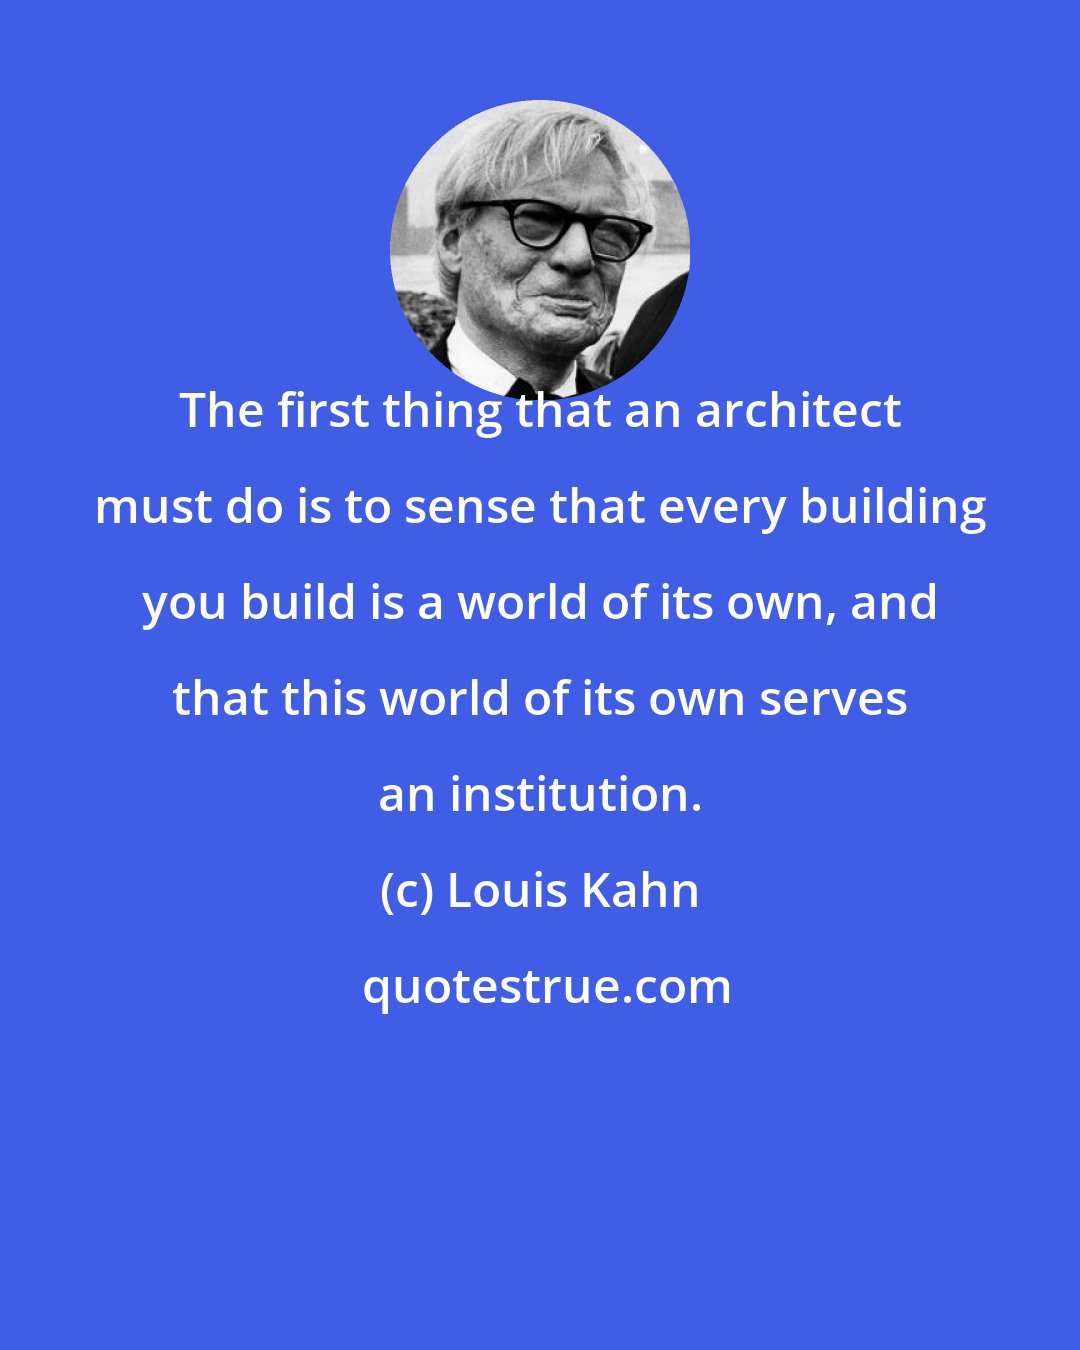 Louis Kahn: The first thing that an architect must do is to sense that every building you build is a world of its own, and that this world of its own serves an institution.